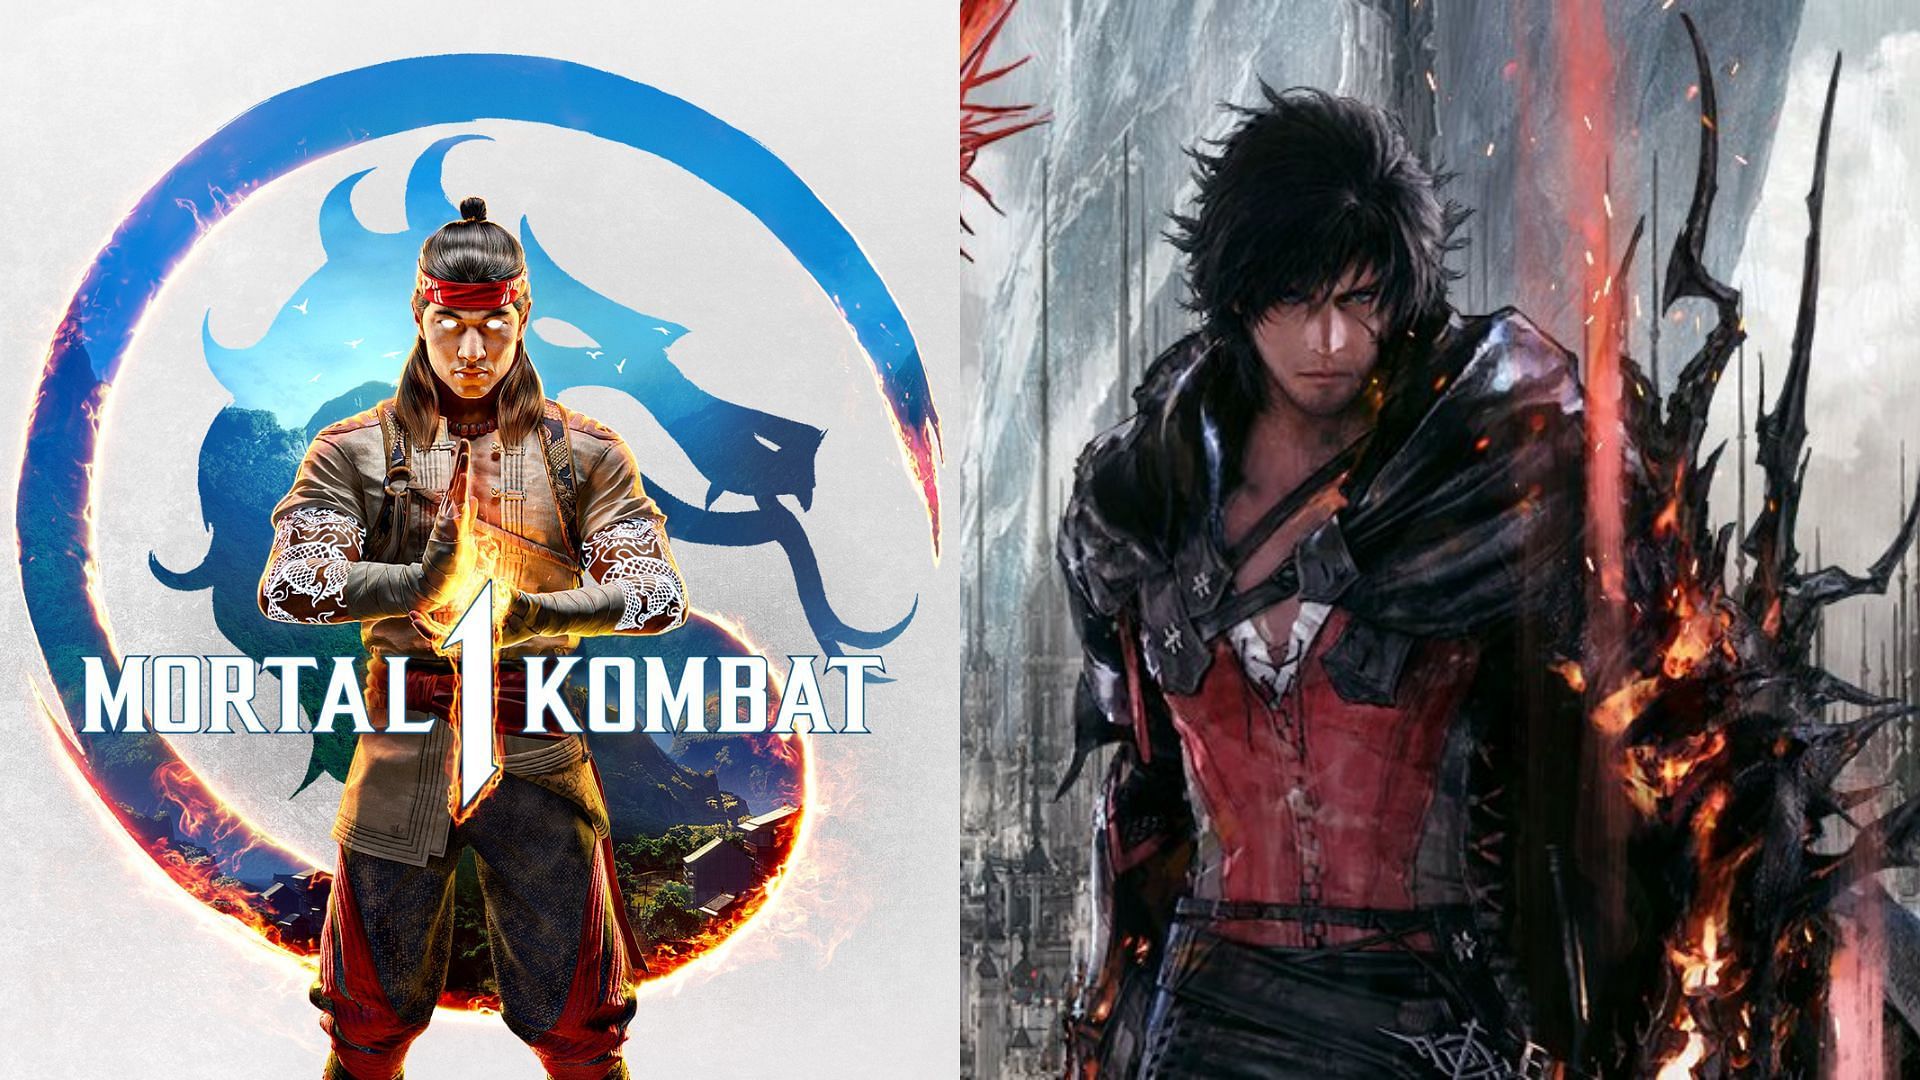 Mortal Kombat 1 is currently on the top of the PlayStation pre-order chart (Images via Warner Bros., Square Enix)